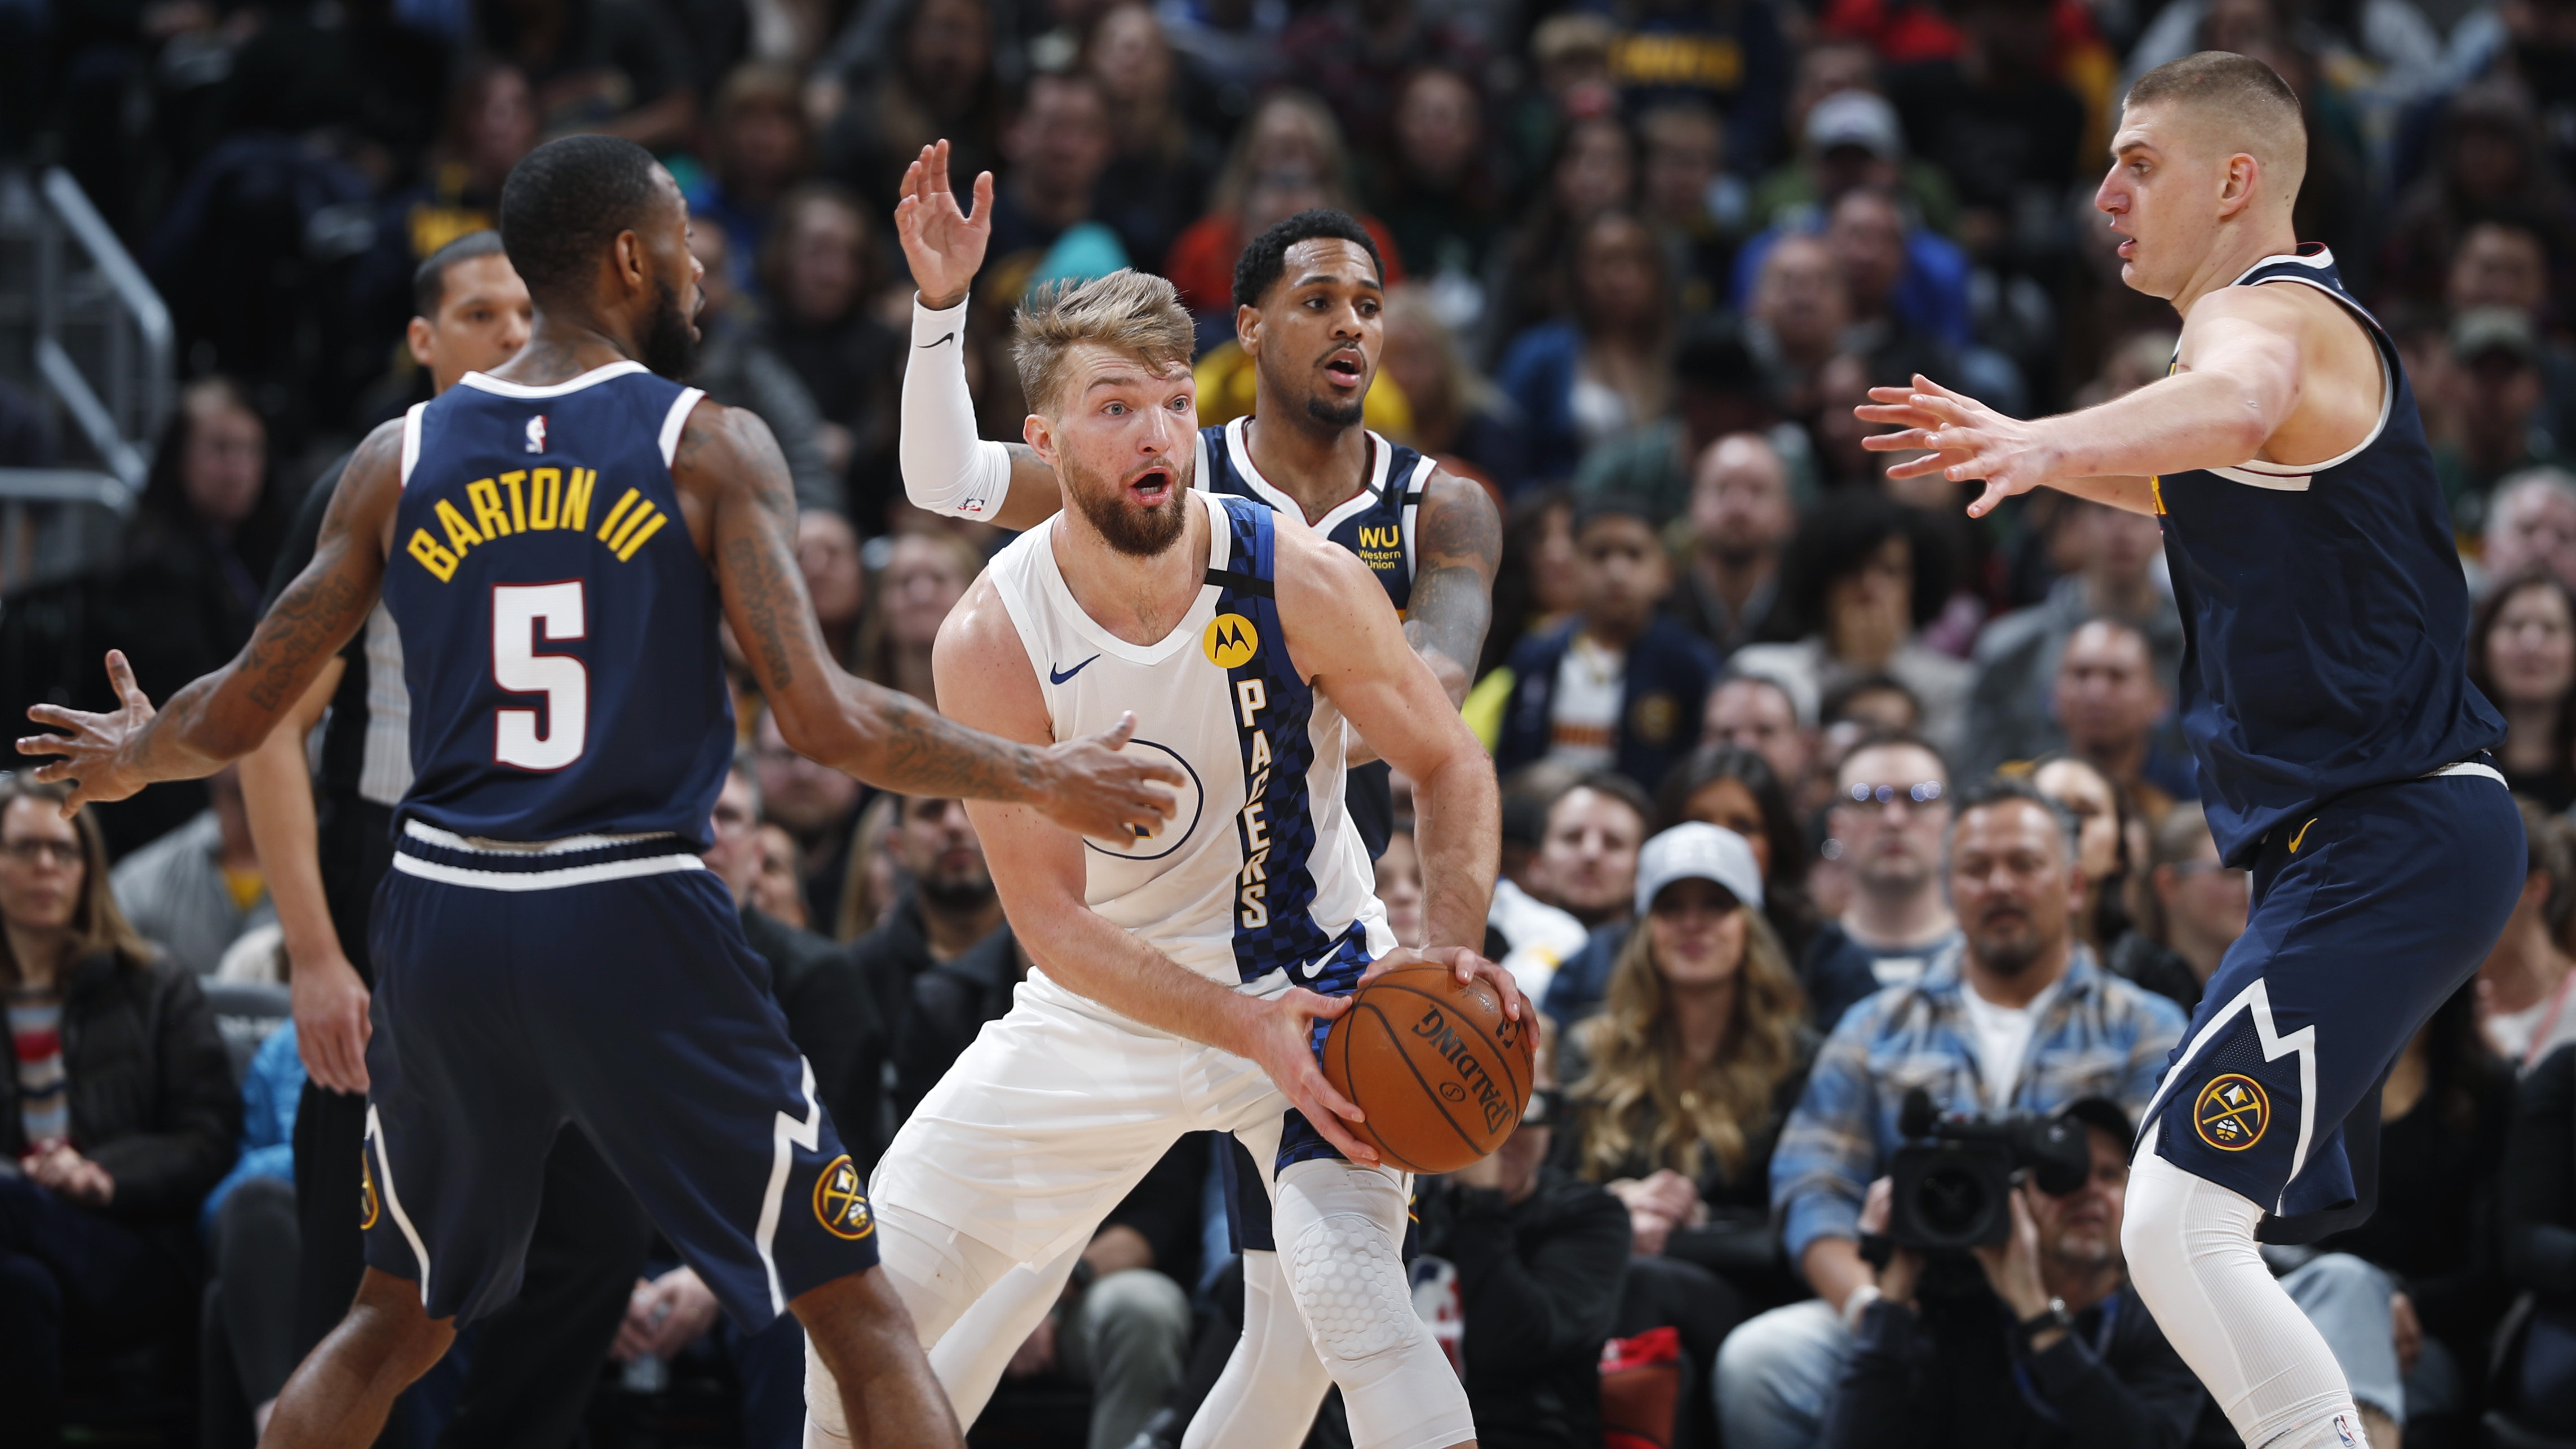 Sabonis posts first career triple-double as Pacers claw back for 115-107 win over Nuggets